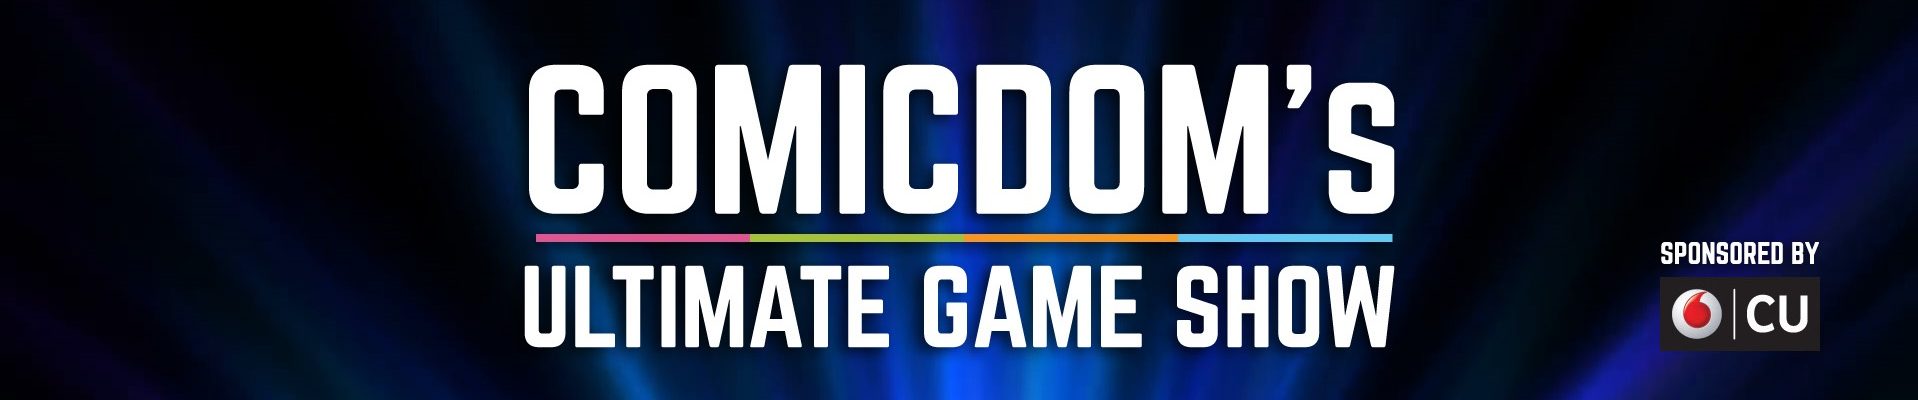 Comicdom Con Athens 2018 - Ultimate Game Show